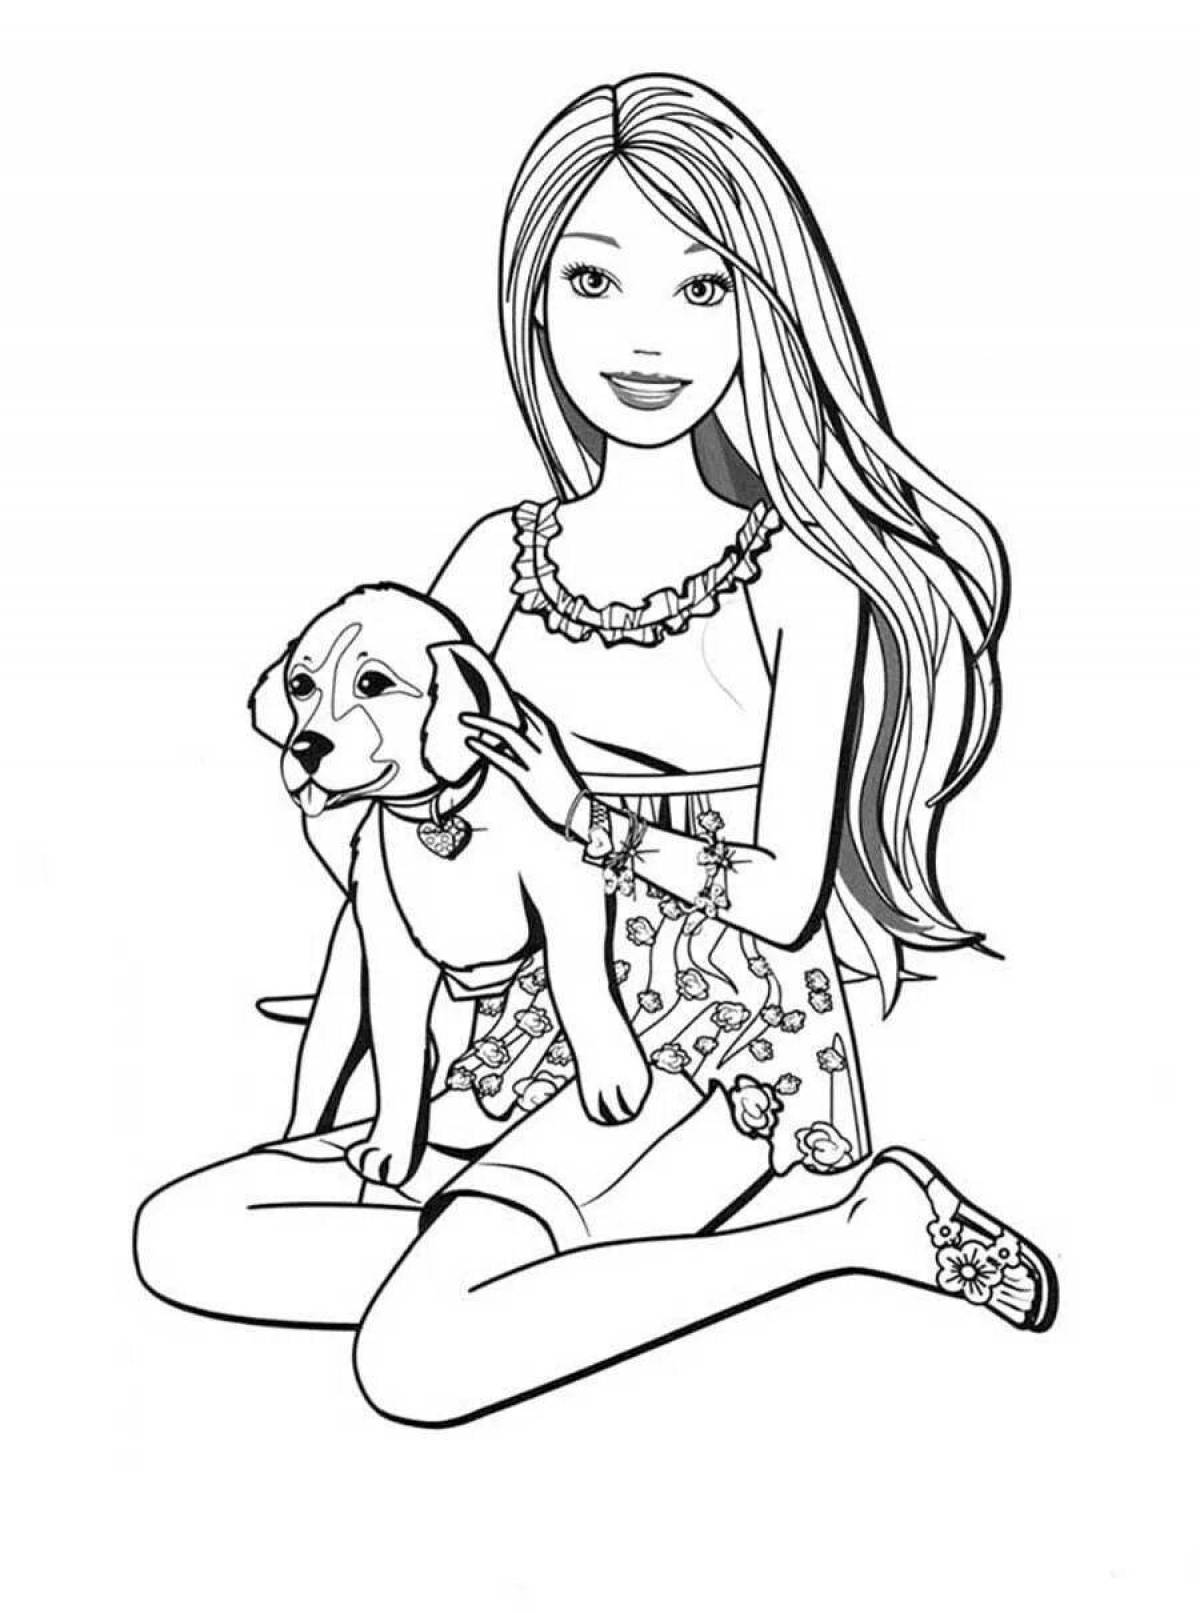 Amazing coloring pages for girls youtube